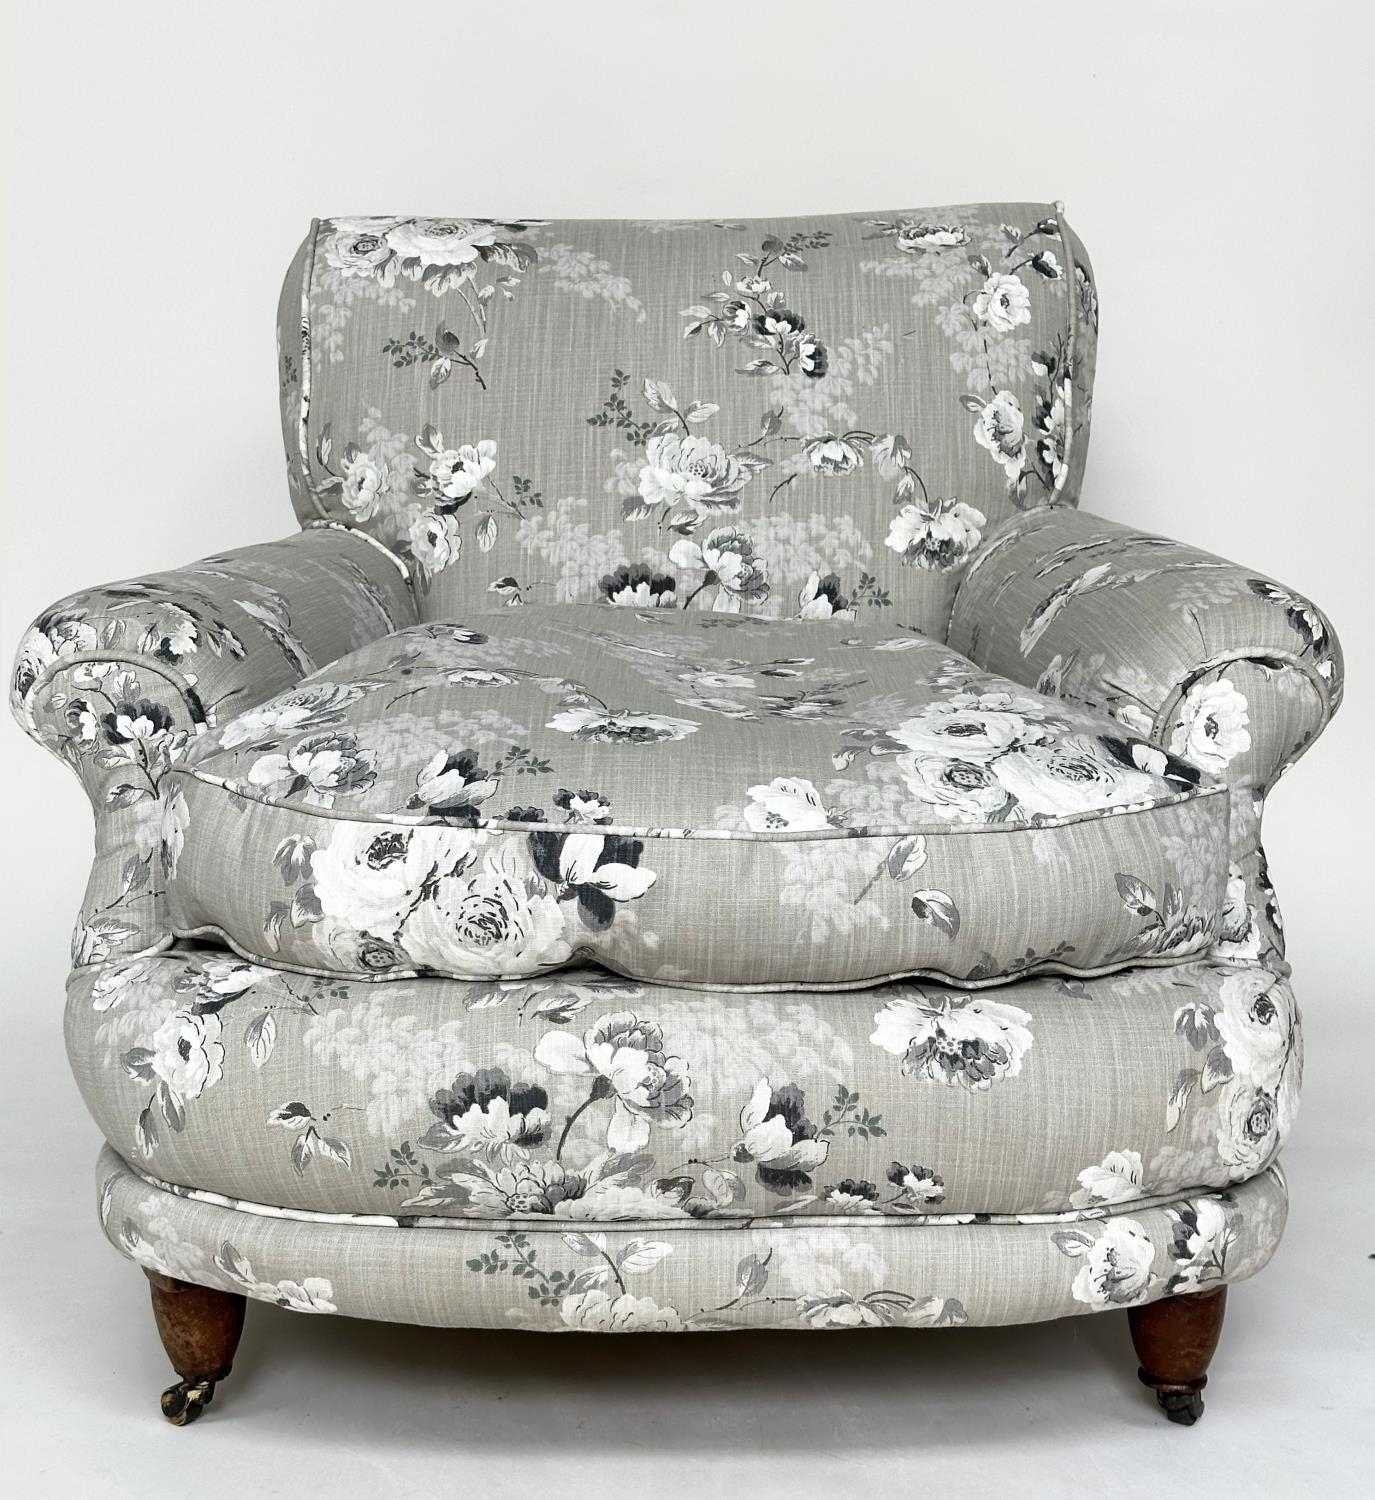 WILLIAM BIRCH ARMCHAIR, 19th century Howard type, newly upholstered in grey linen impressed numerals - Image 9 of 13